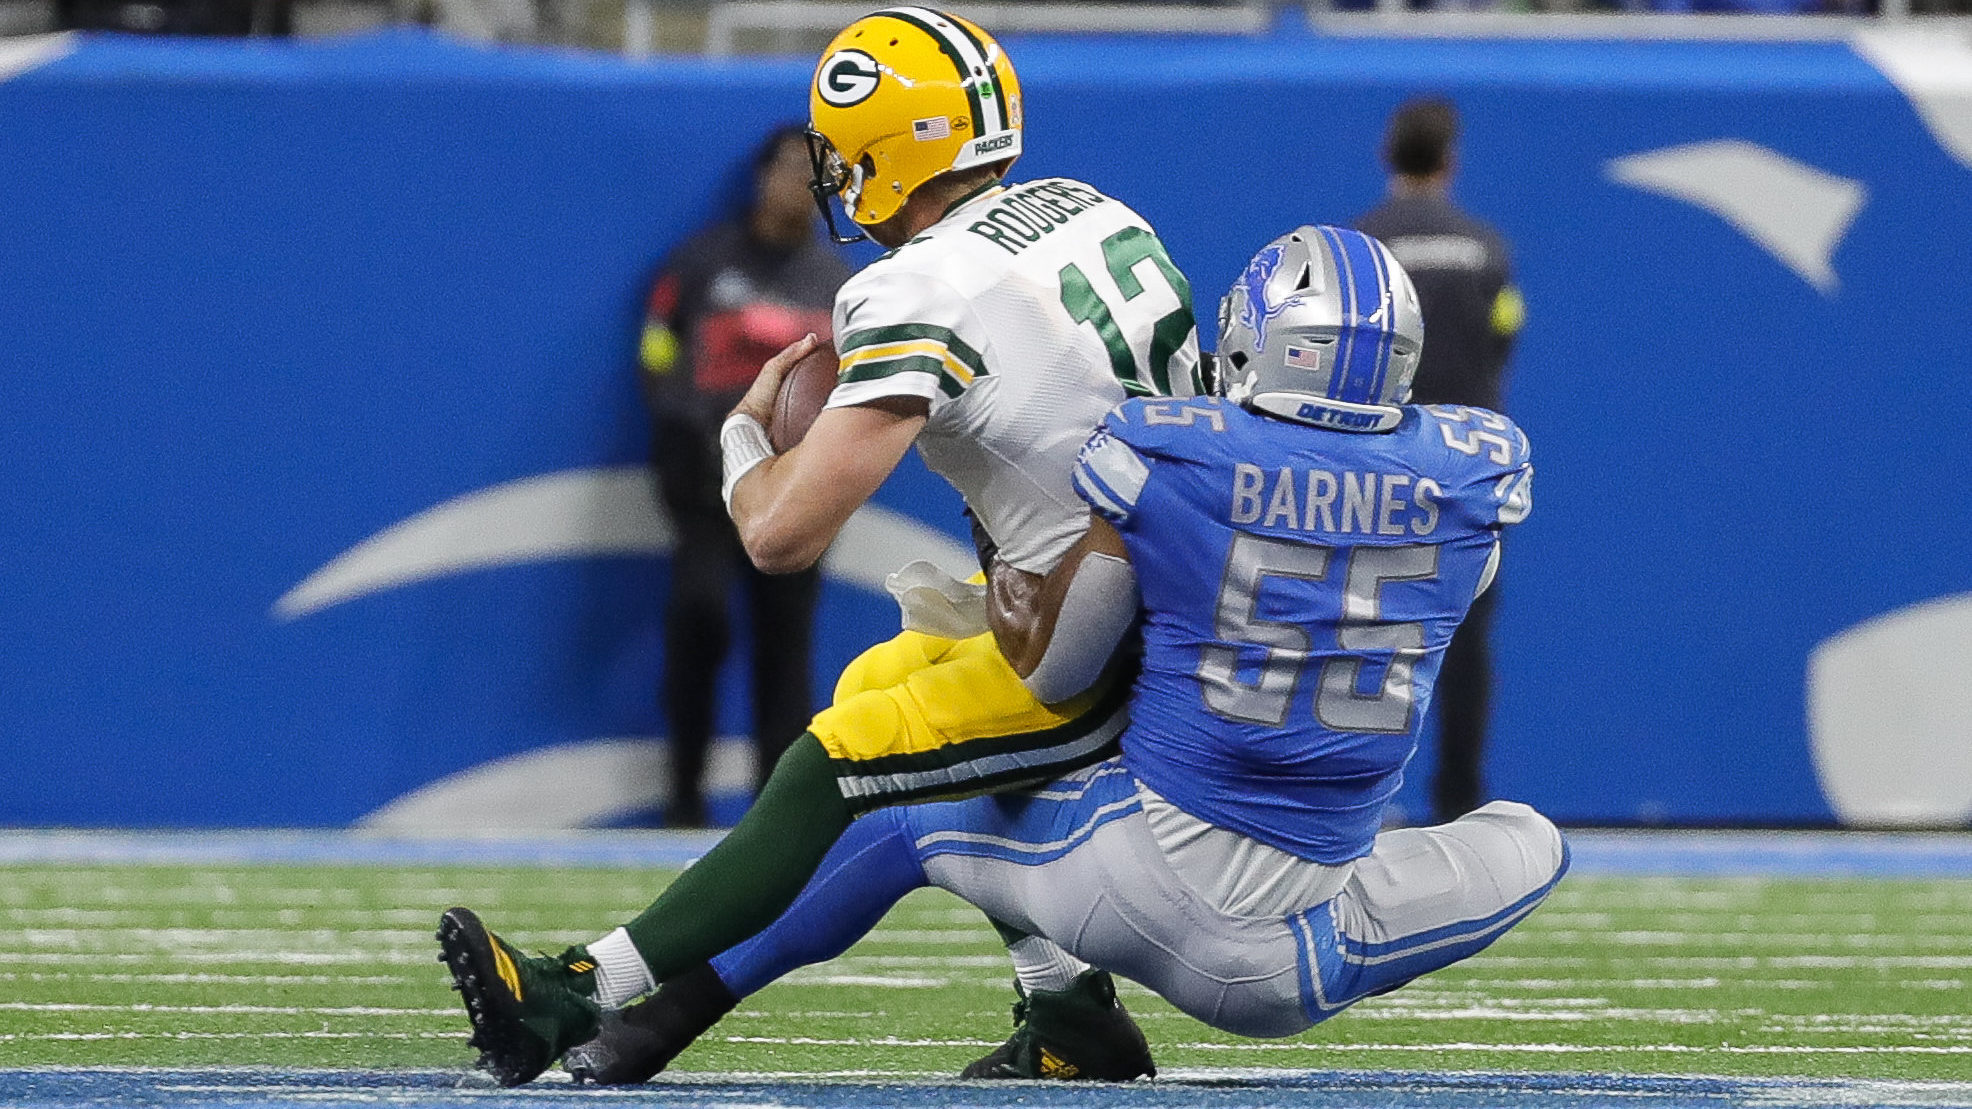 Rack 'em: Packers, Lions shoot for NFC North